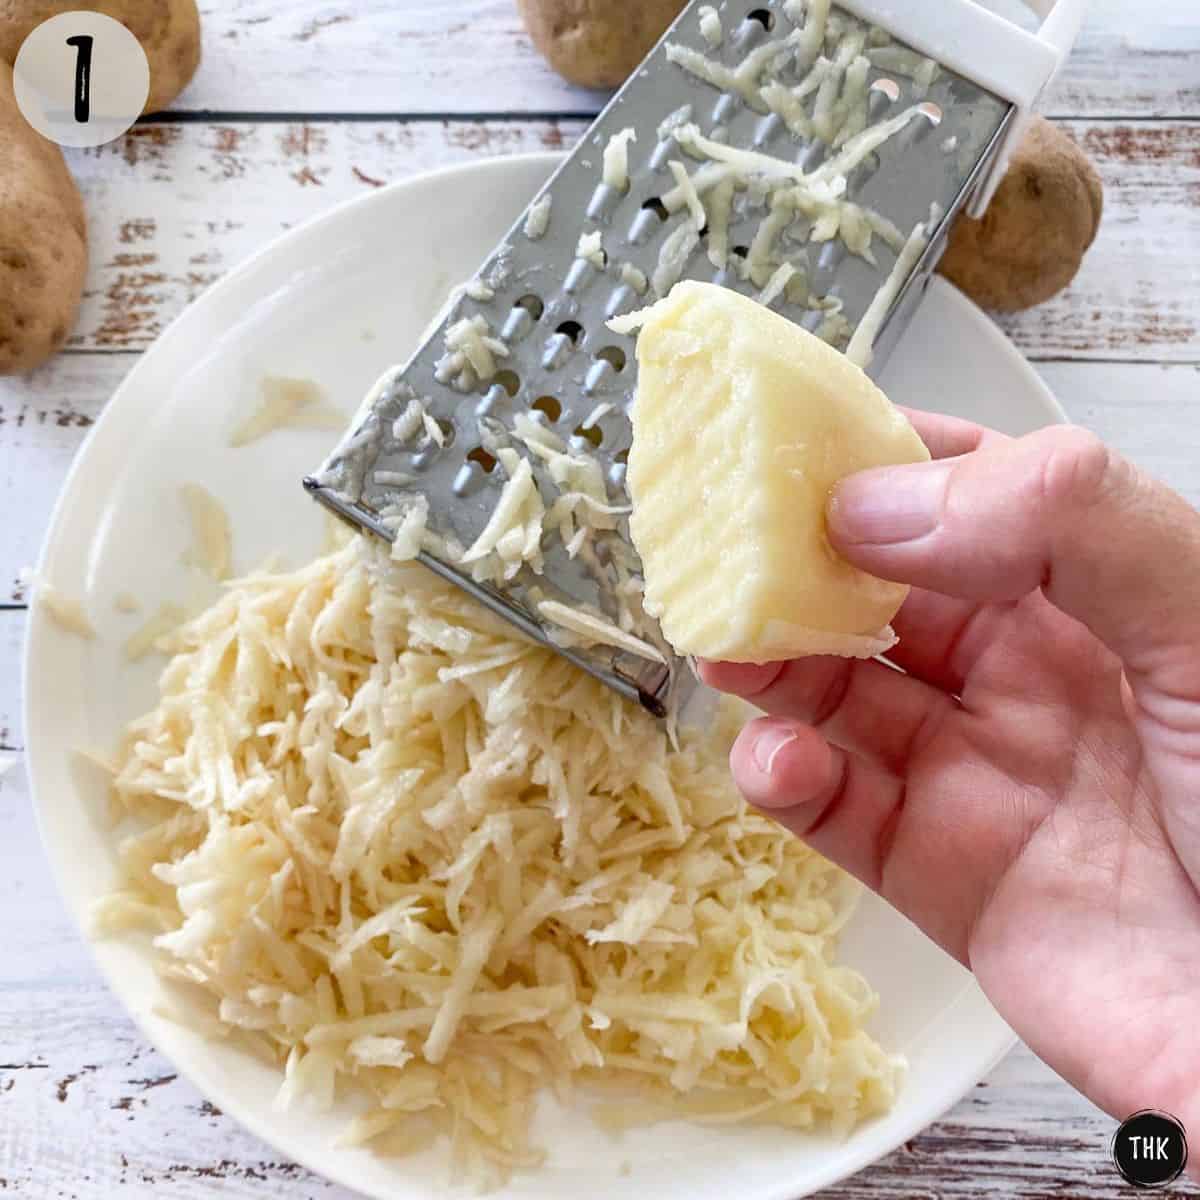 Potatoes being grated using a shredder into a white plate.